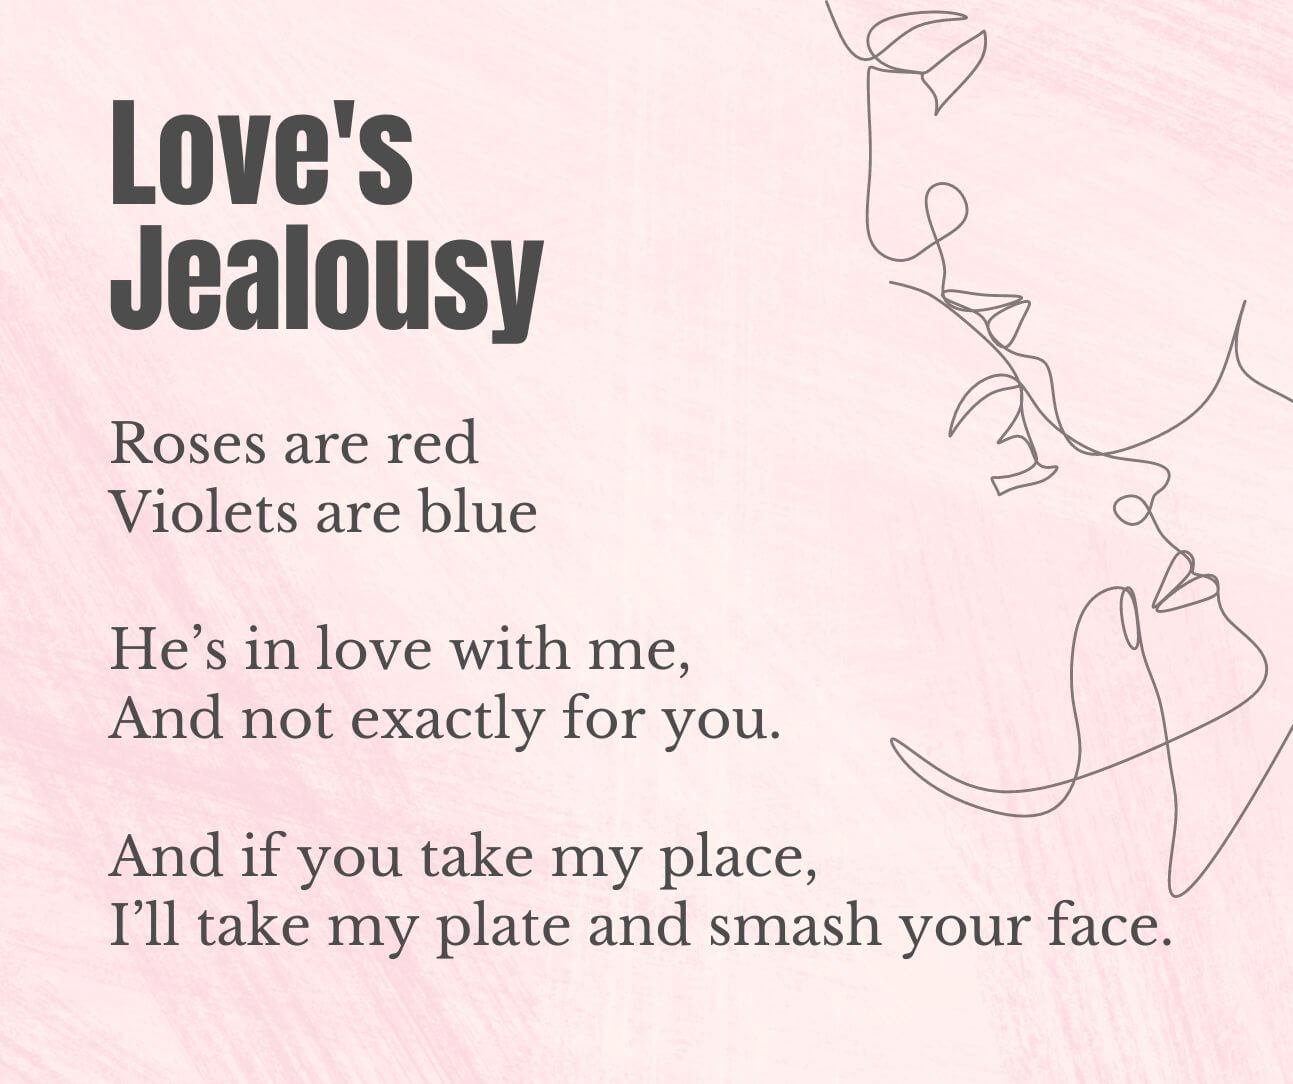 50+ Funny Love Poems to Make Her/Him Laugh (With Images) - iPhone2Lovely